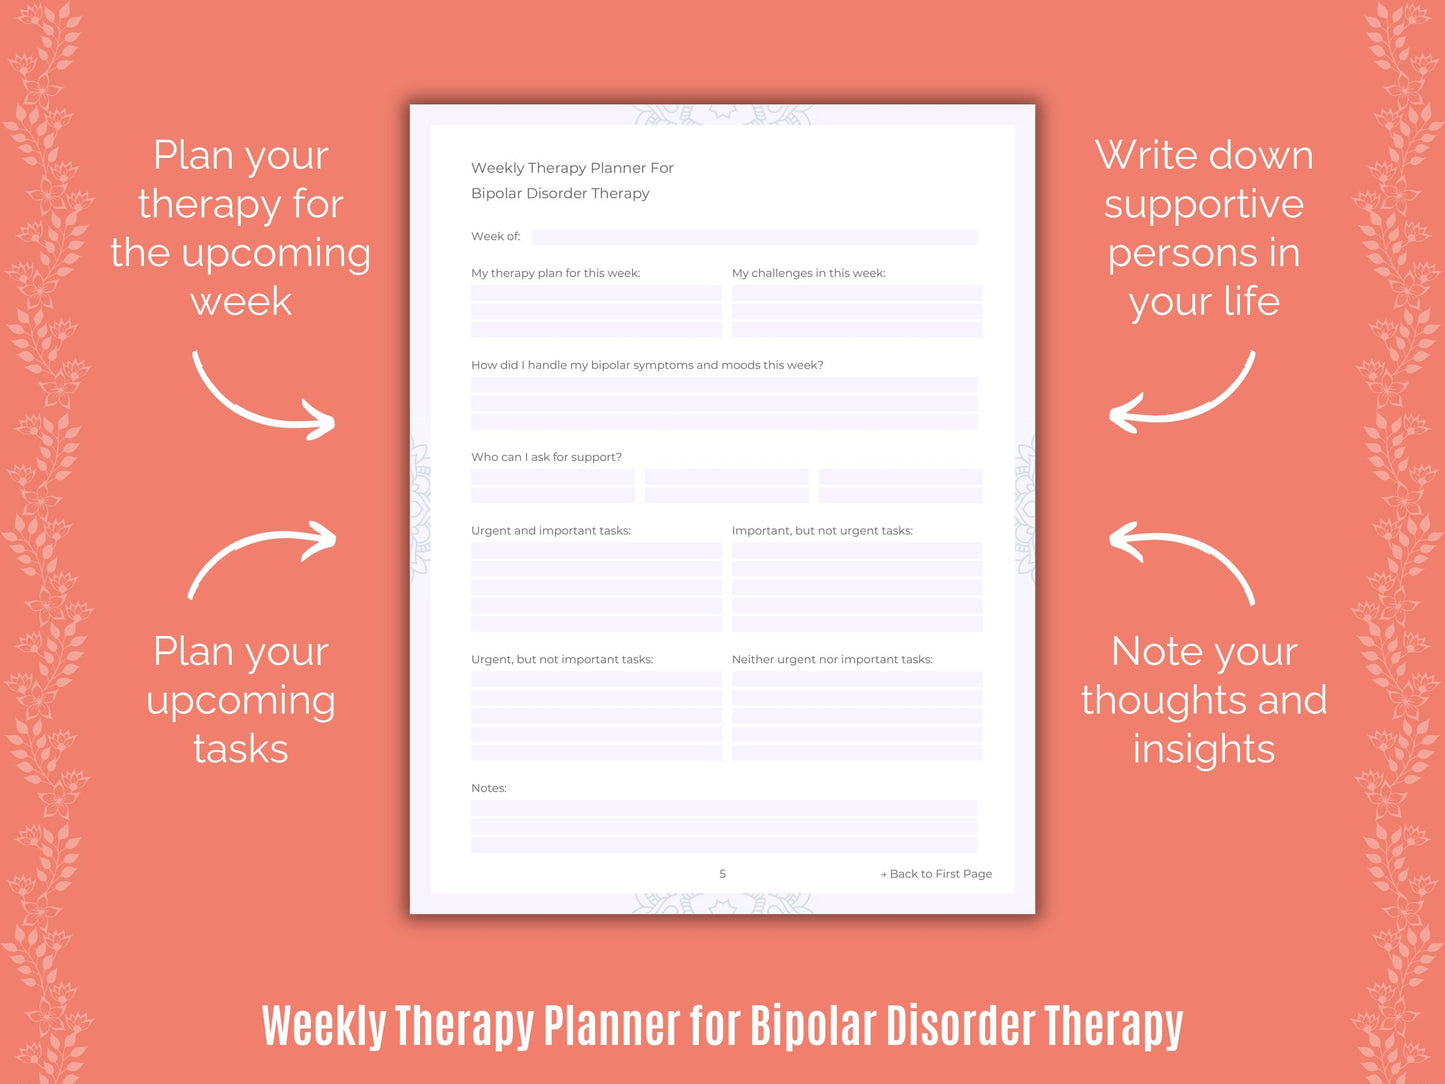 Bipolar Disorder Therapy, Journaling, Cheat Sheet, Tools, Goal Setting, Workbooks, Resources, Therapy, Counseling, Journals, Planners, Templates, Notes